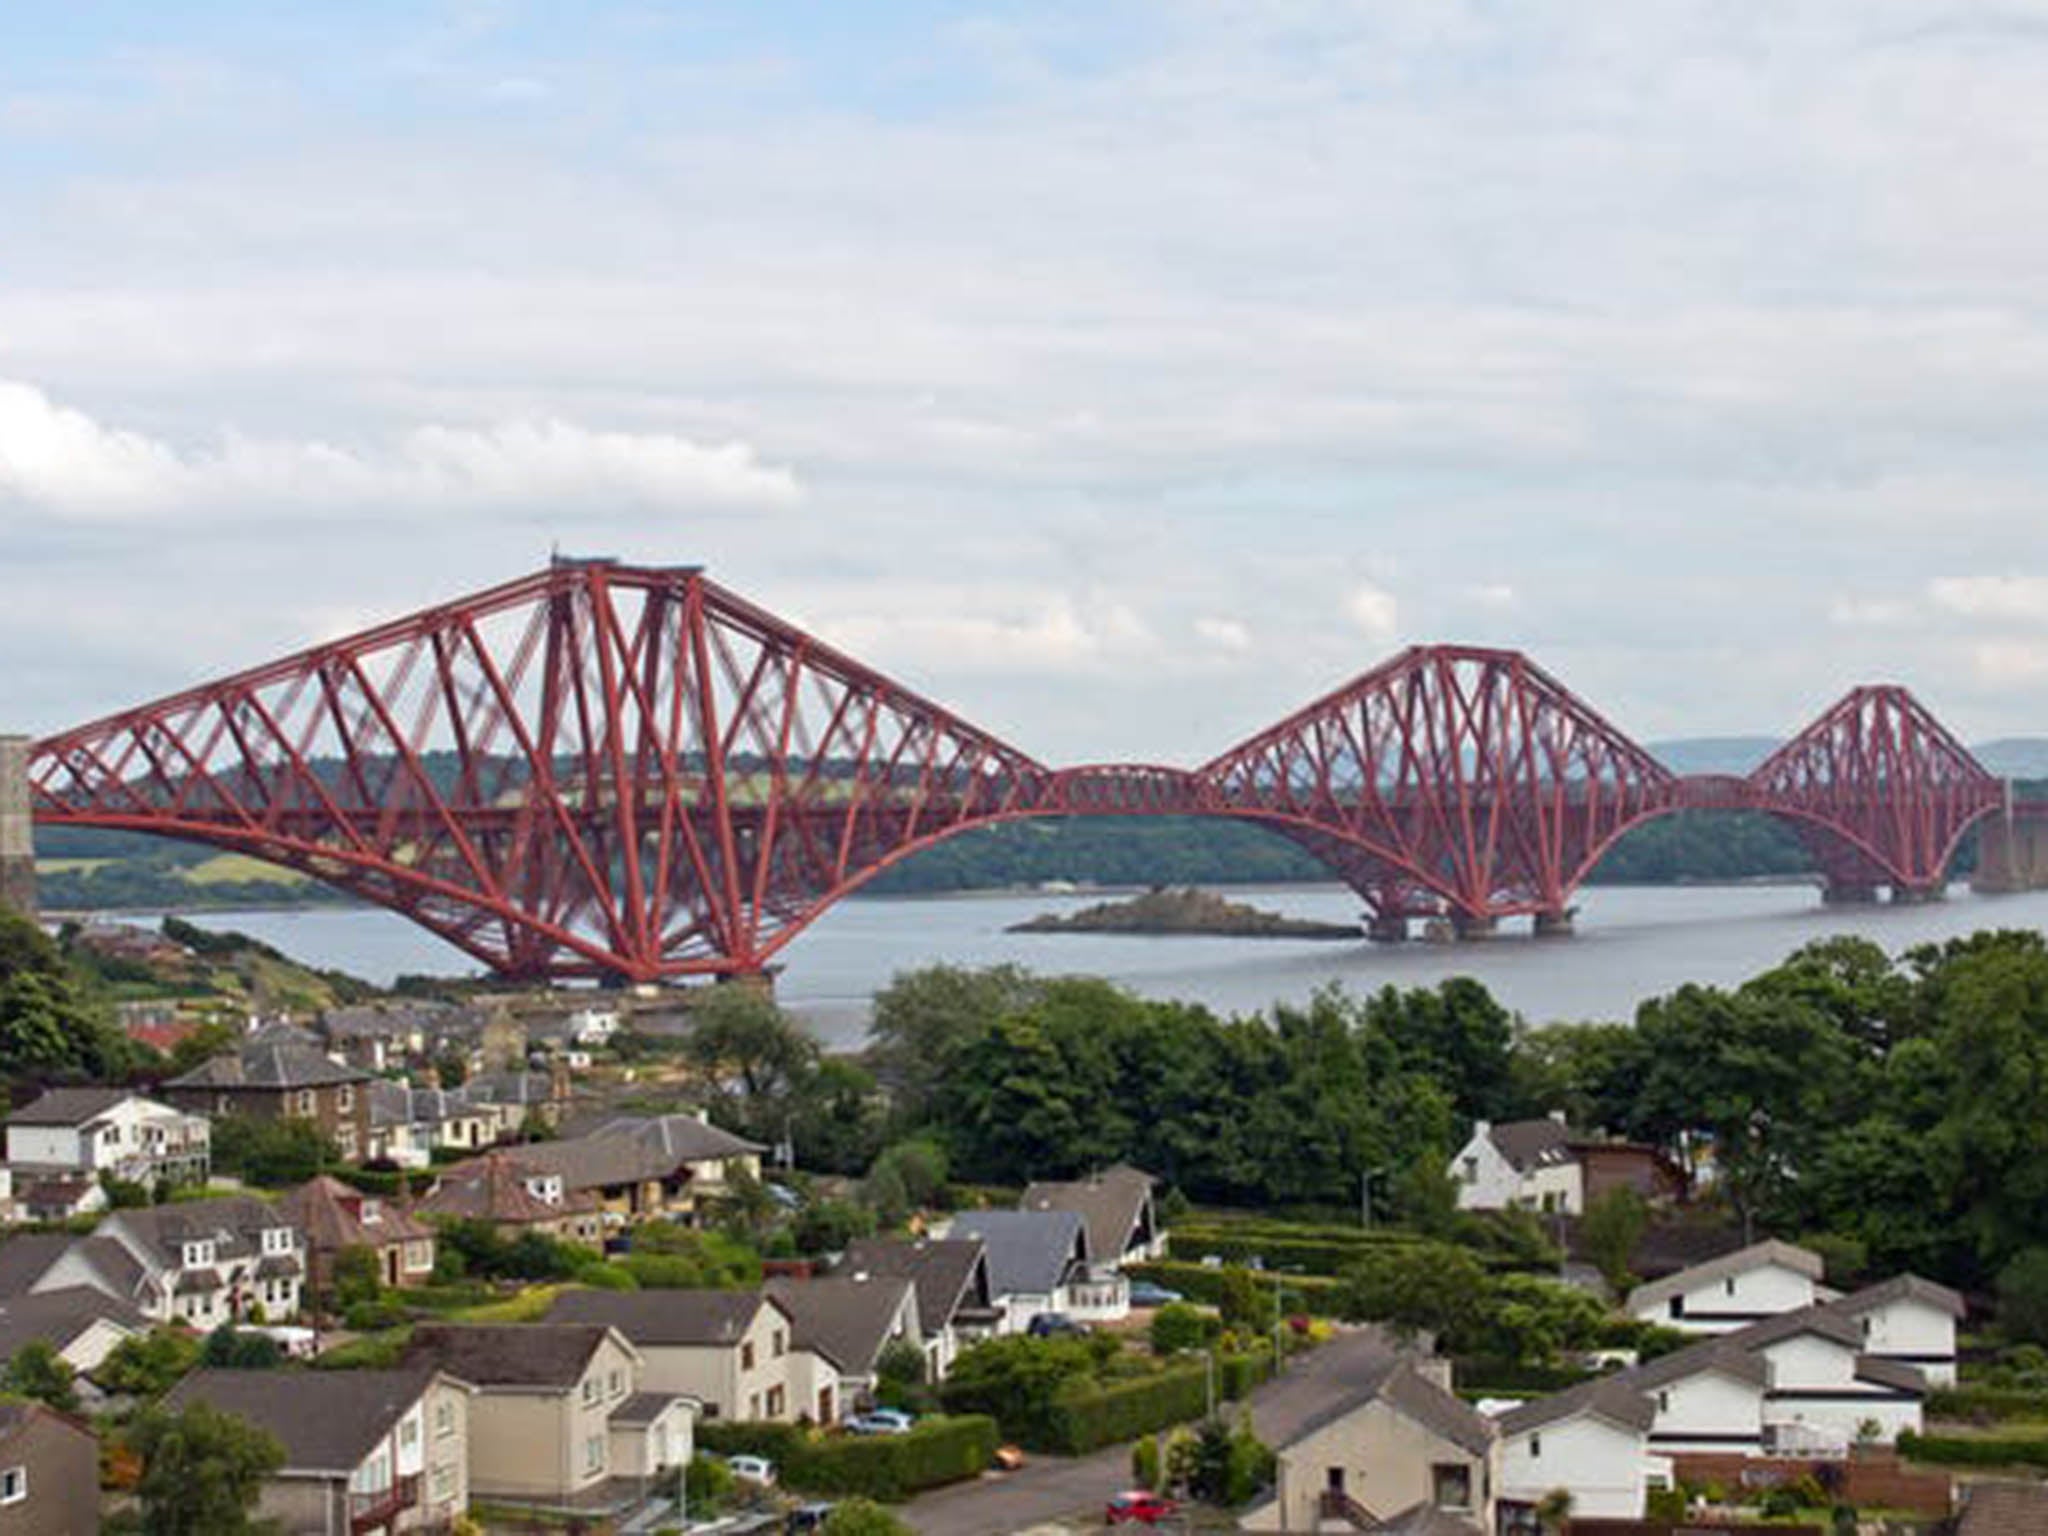 The Forth Rail Bridge, which opened in 1890, was last year voted Scotland’s greatest man-made wonder